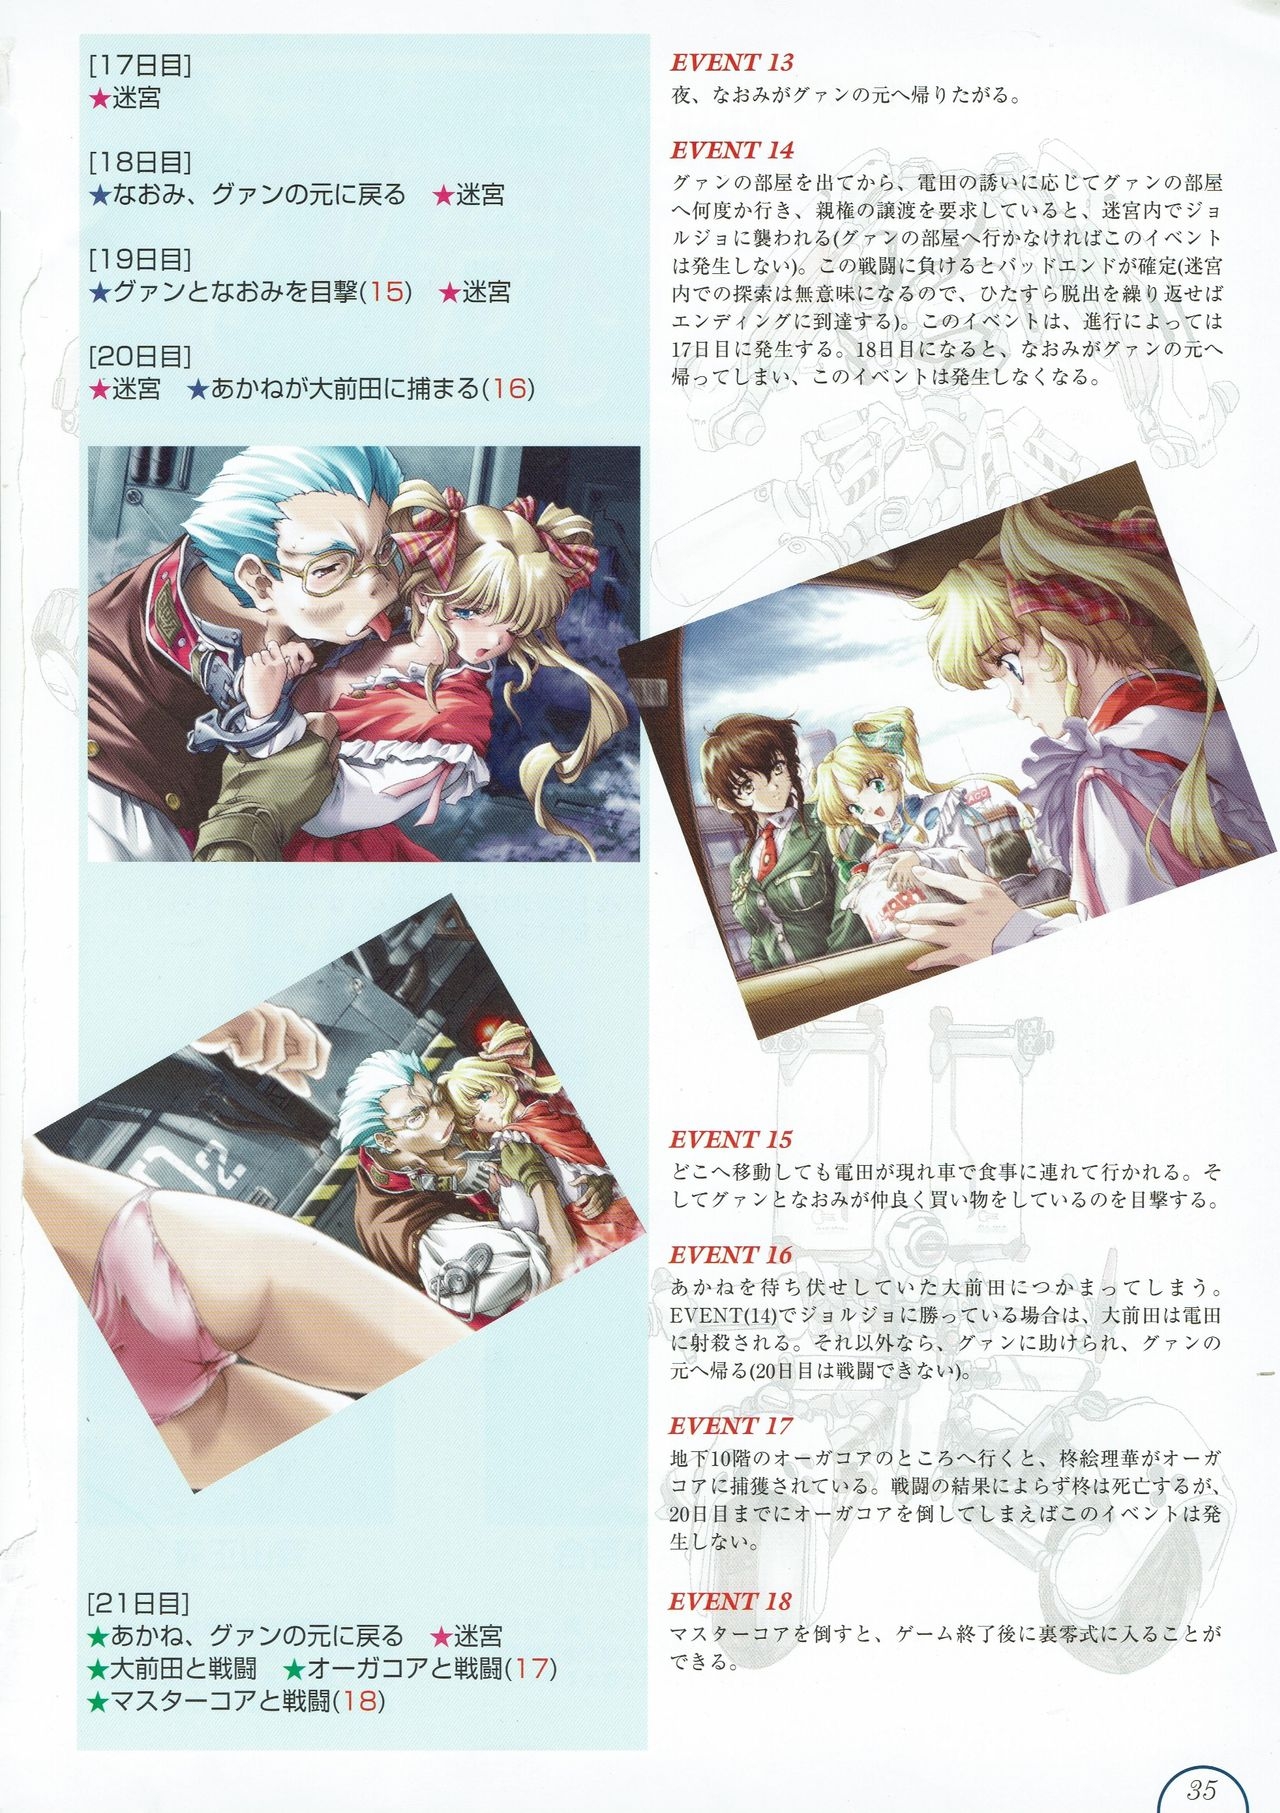 Alice no Yakata 456 Official Guide 36